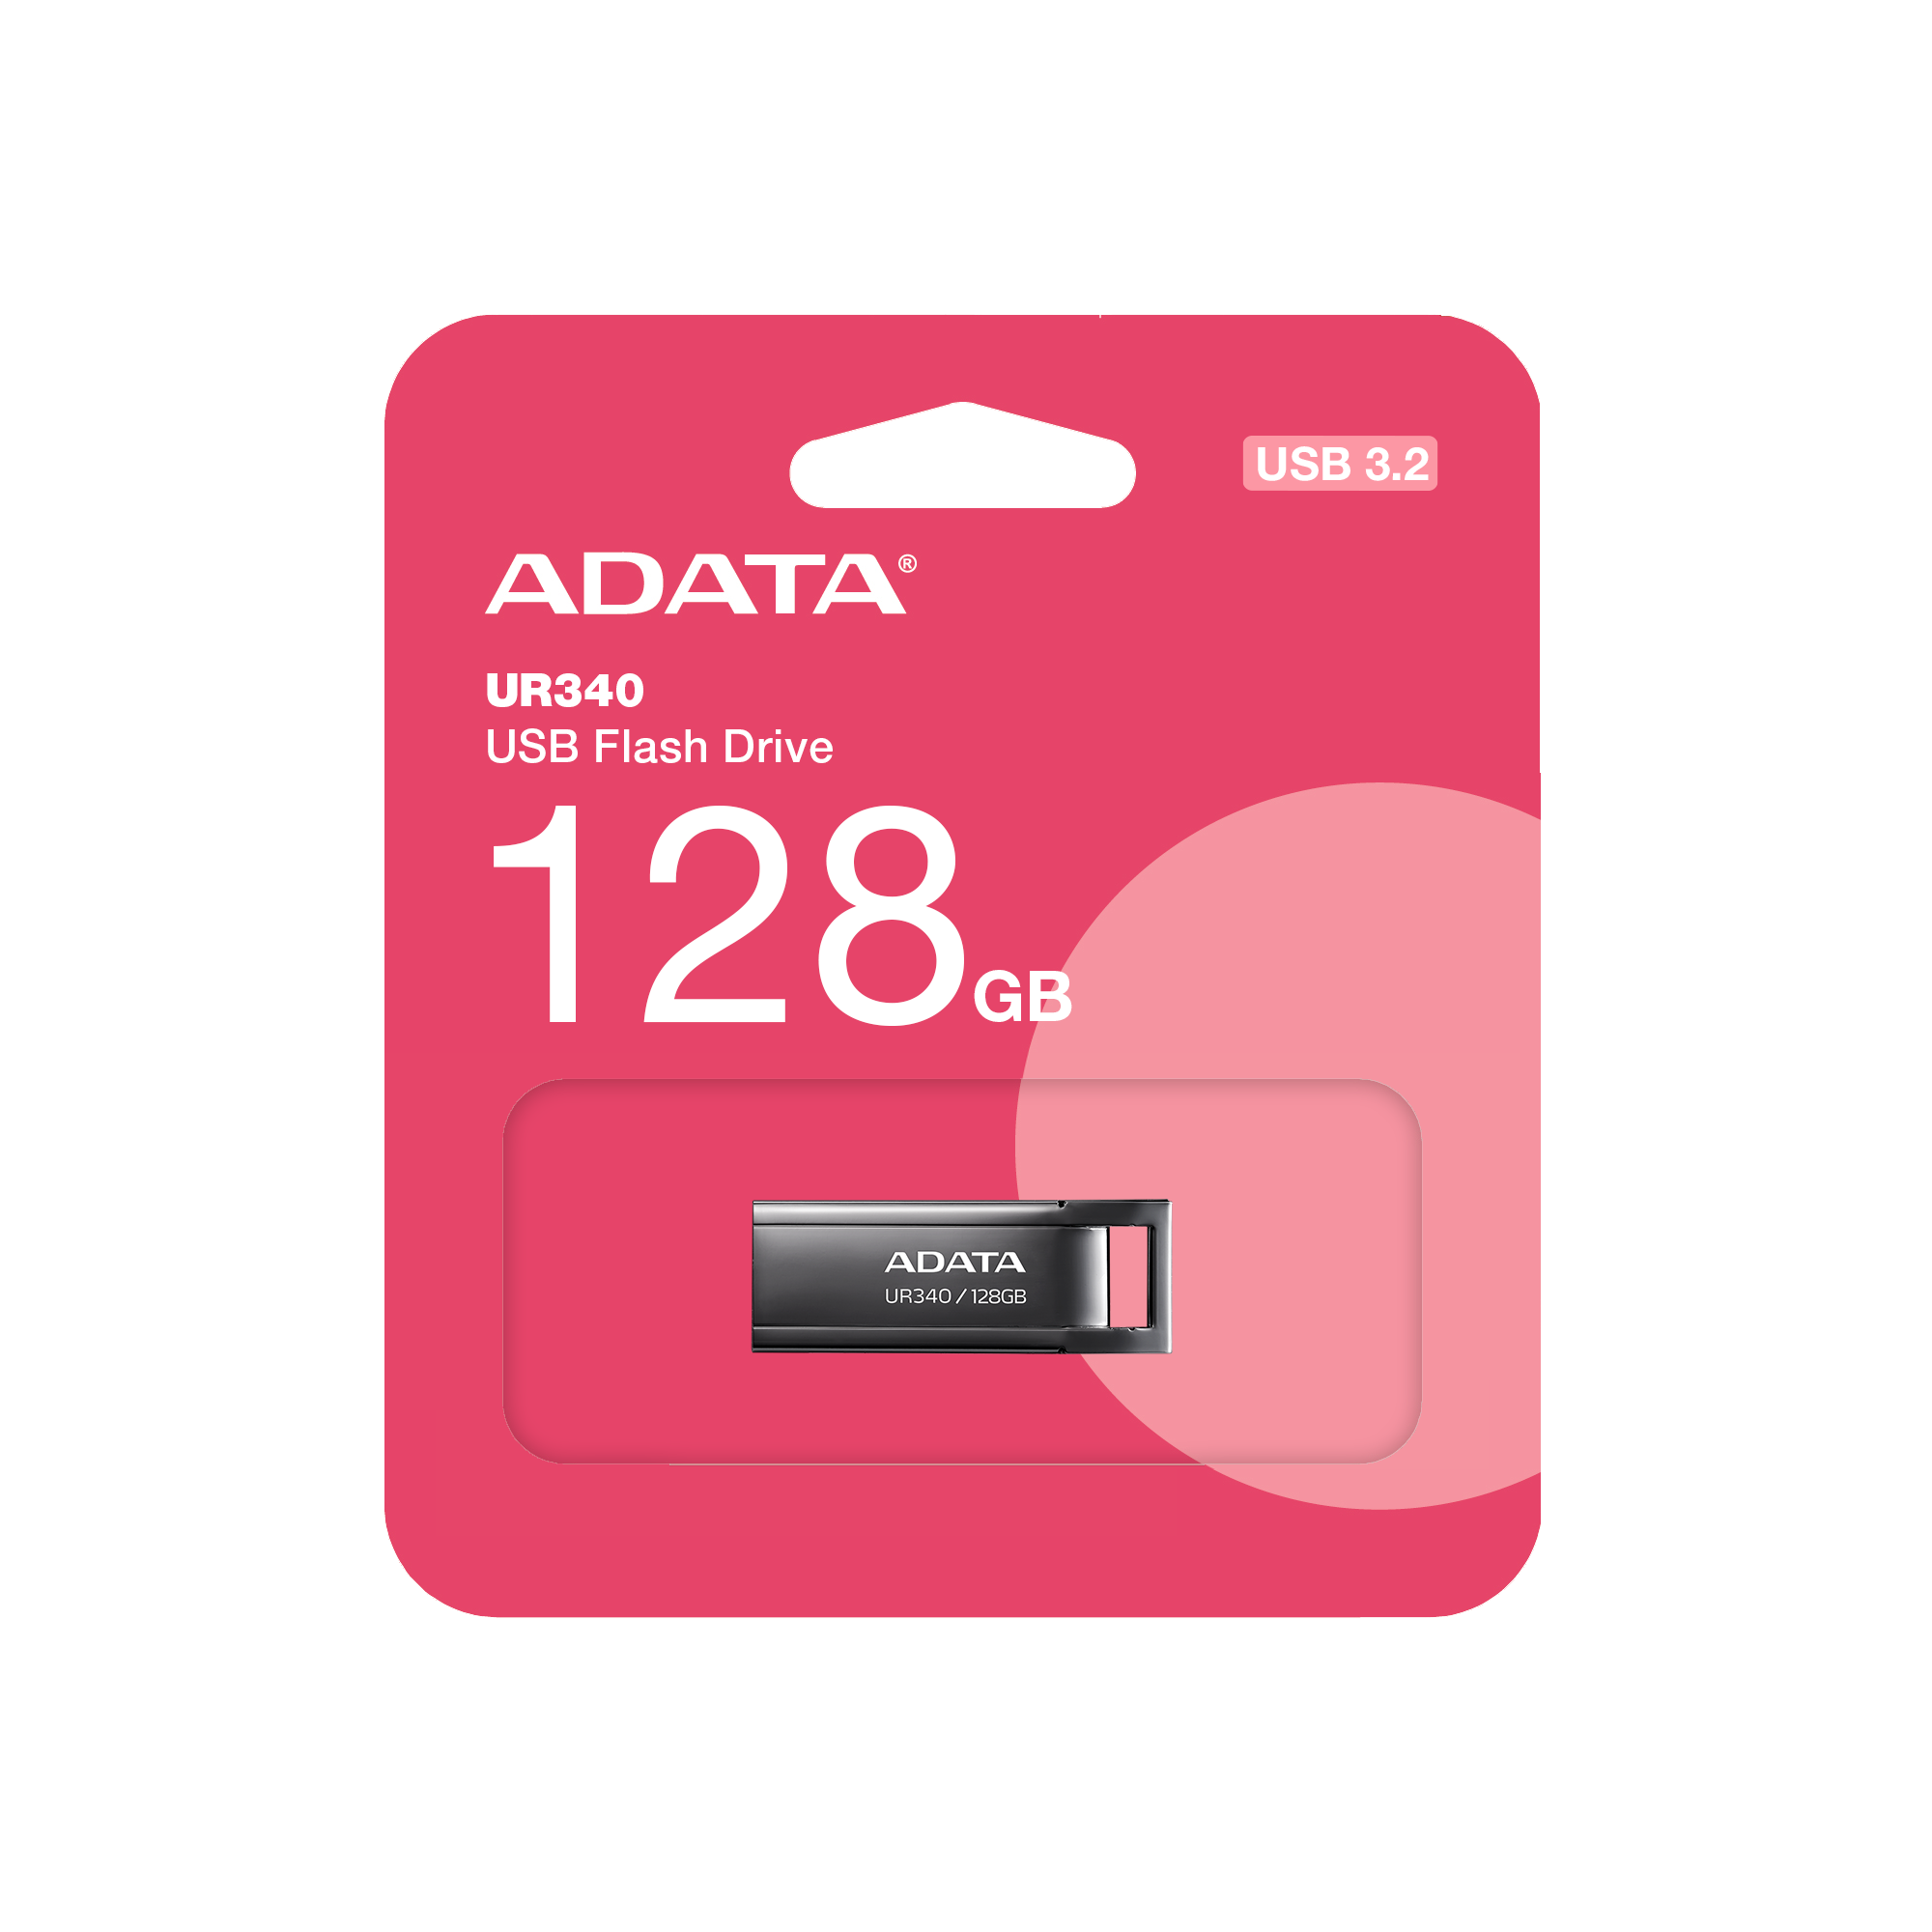 ADATA UR340 USB Flash Drive, Solidly Compact, 128GB 5